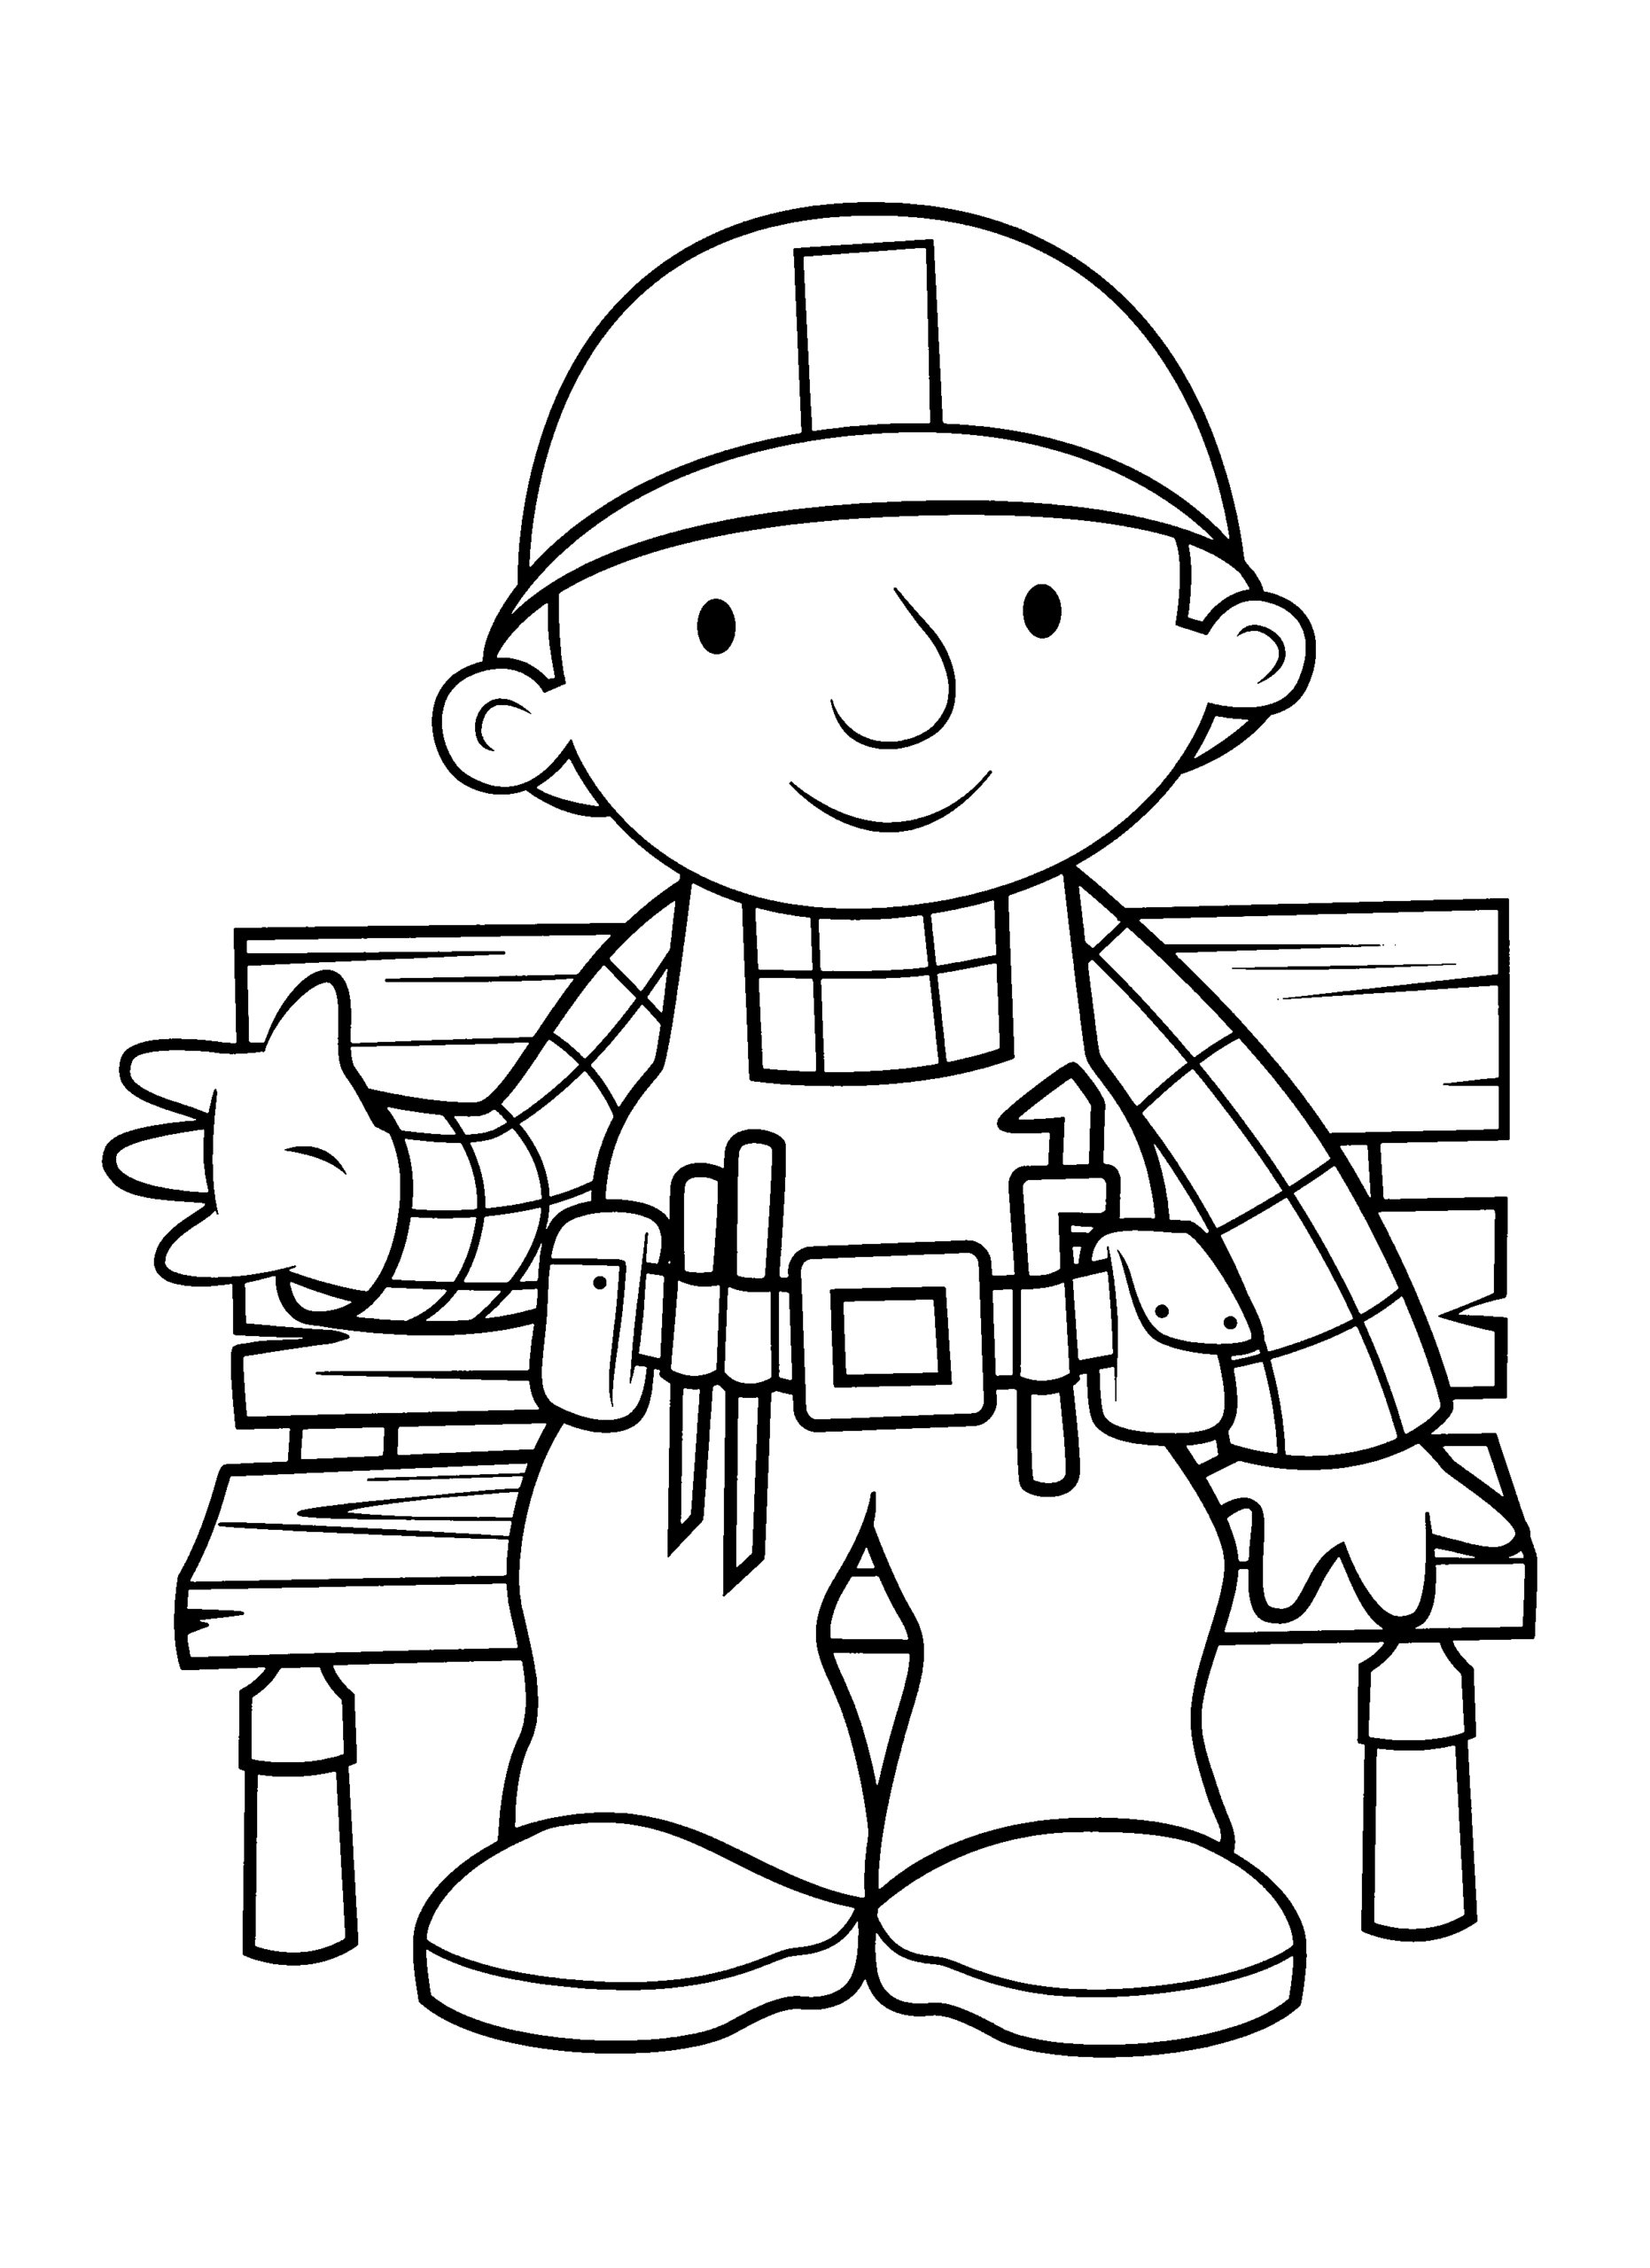 bob the builder coloring pages to print